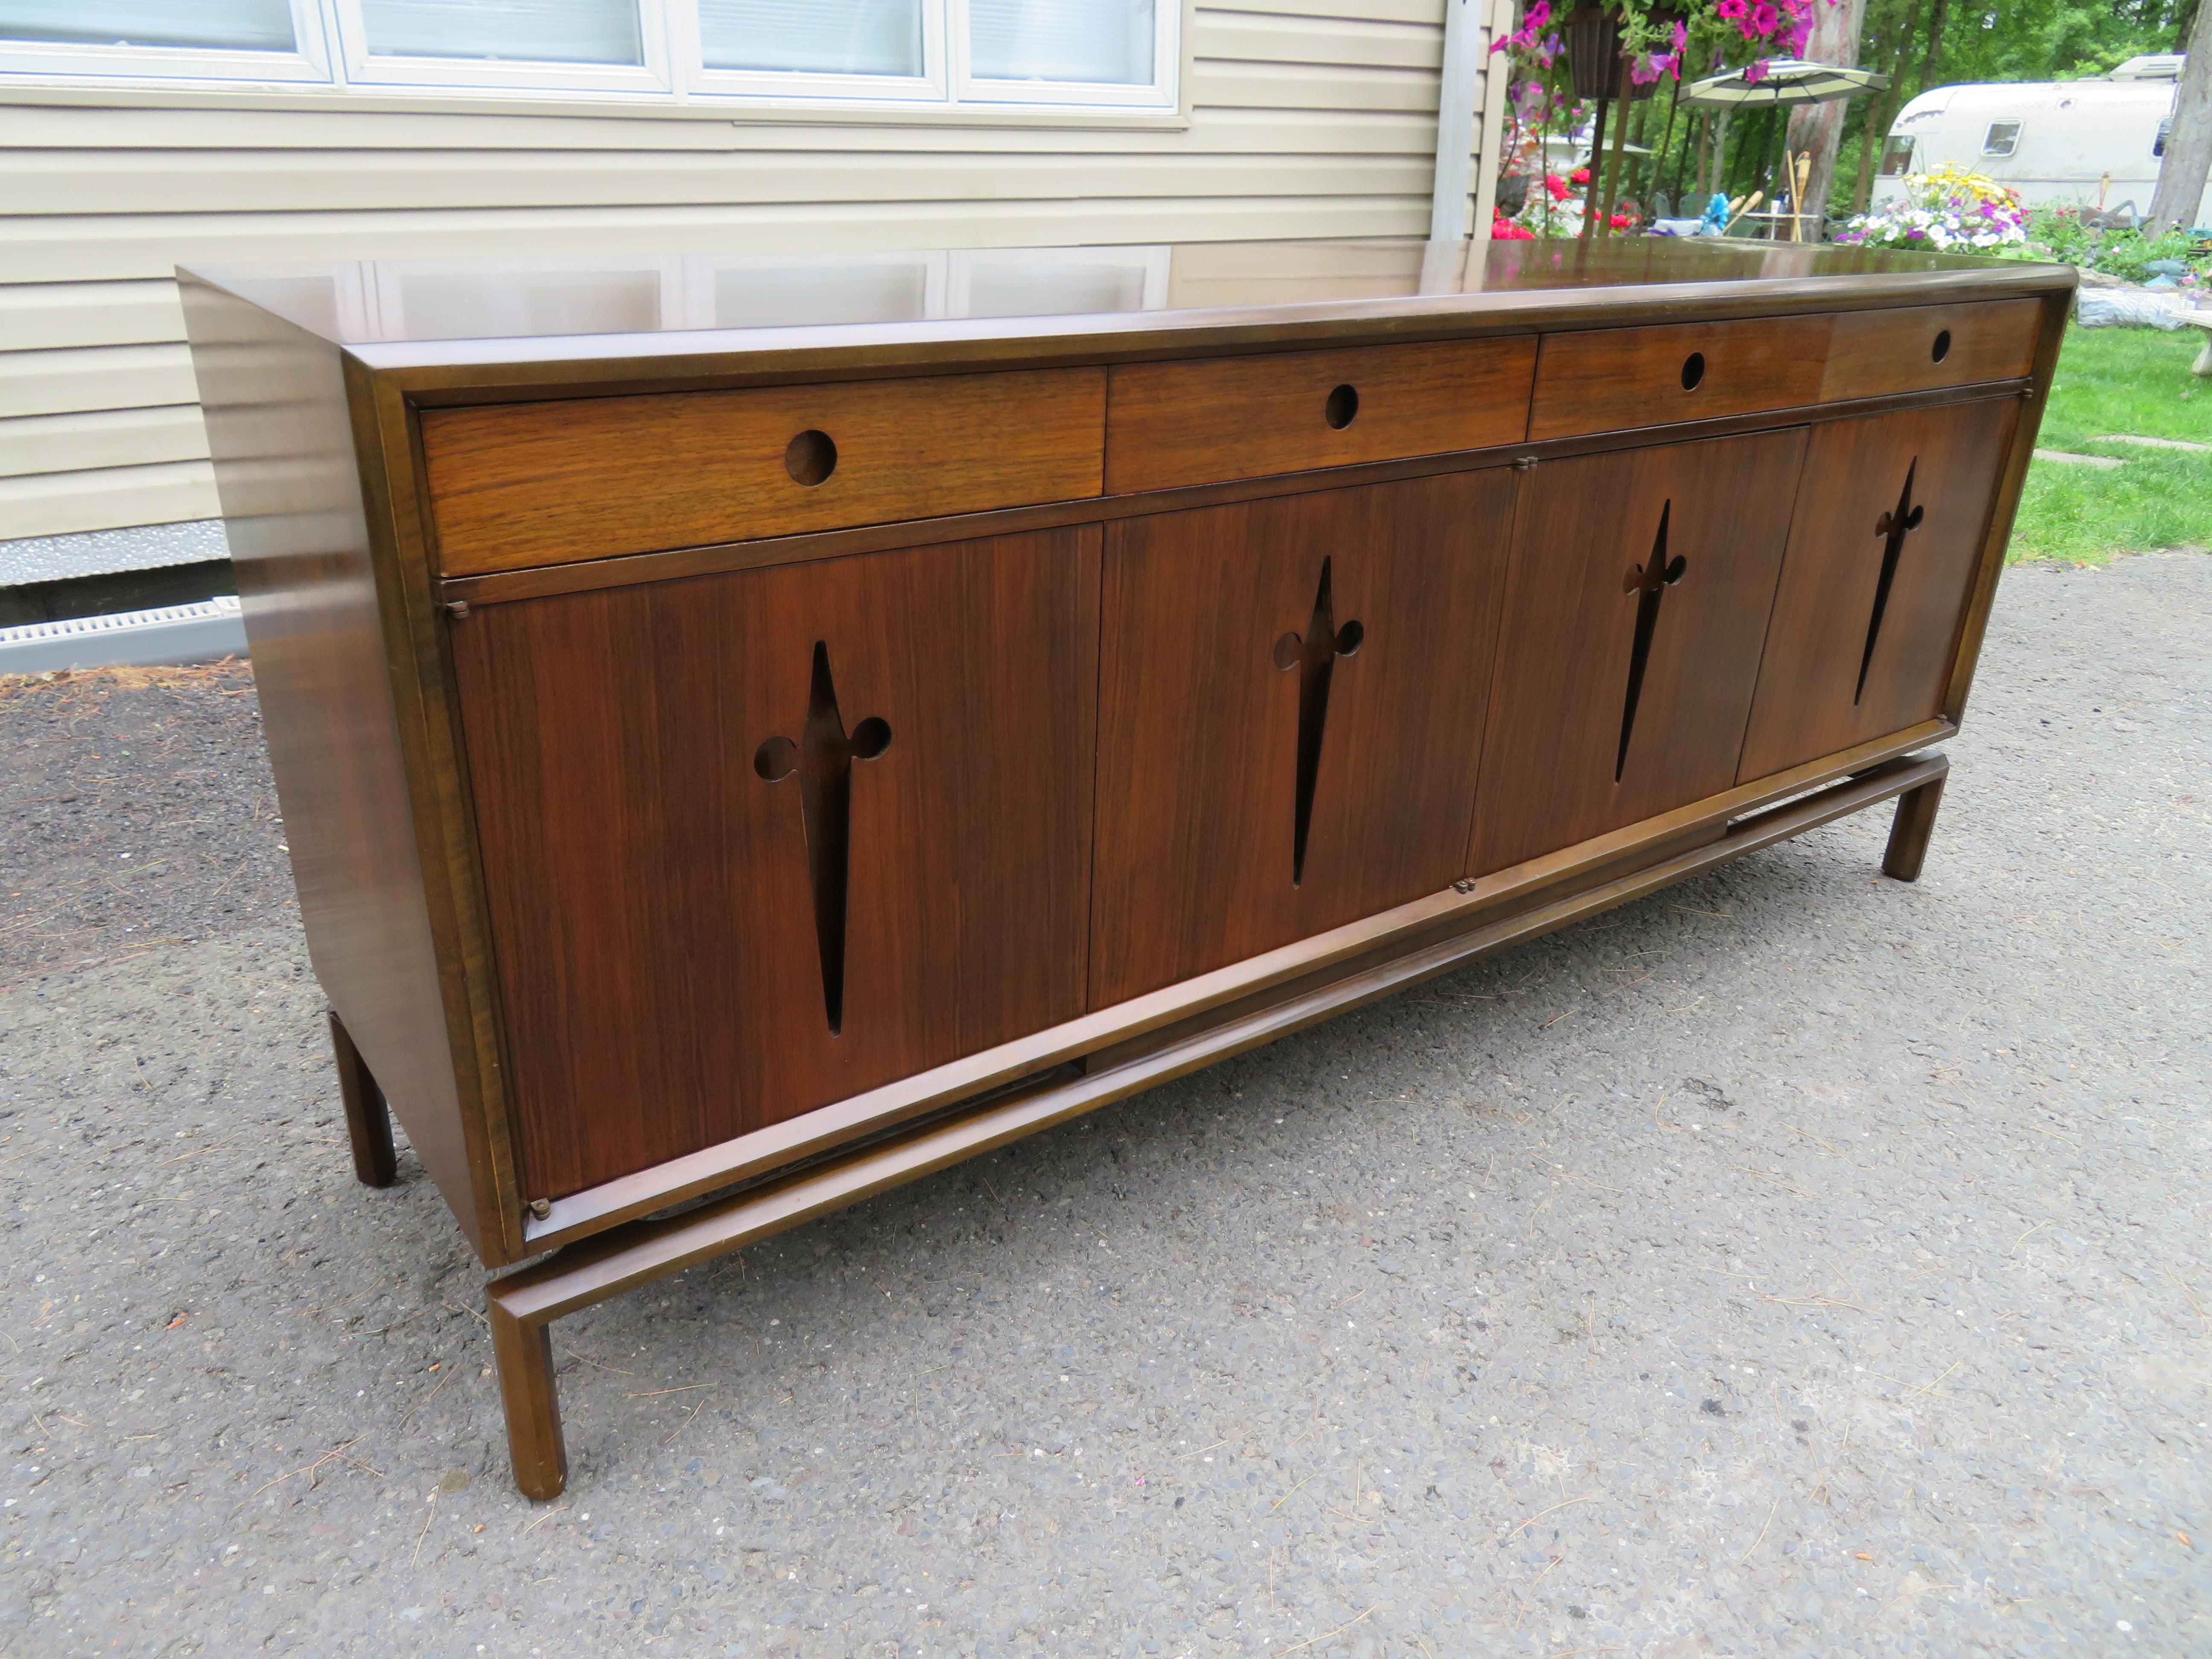 Stunning Edmond J. Spence walnut credenza manufactured in Sweden and features an easily recognisable high-quality construction. The four hinged cabinets open via handles of cut-out crucifixes. The cabinet itself is given a gentle floating feeling